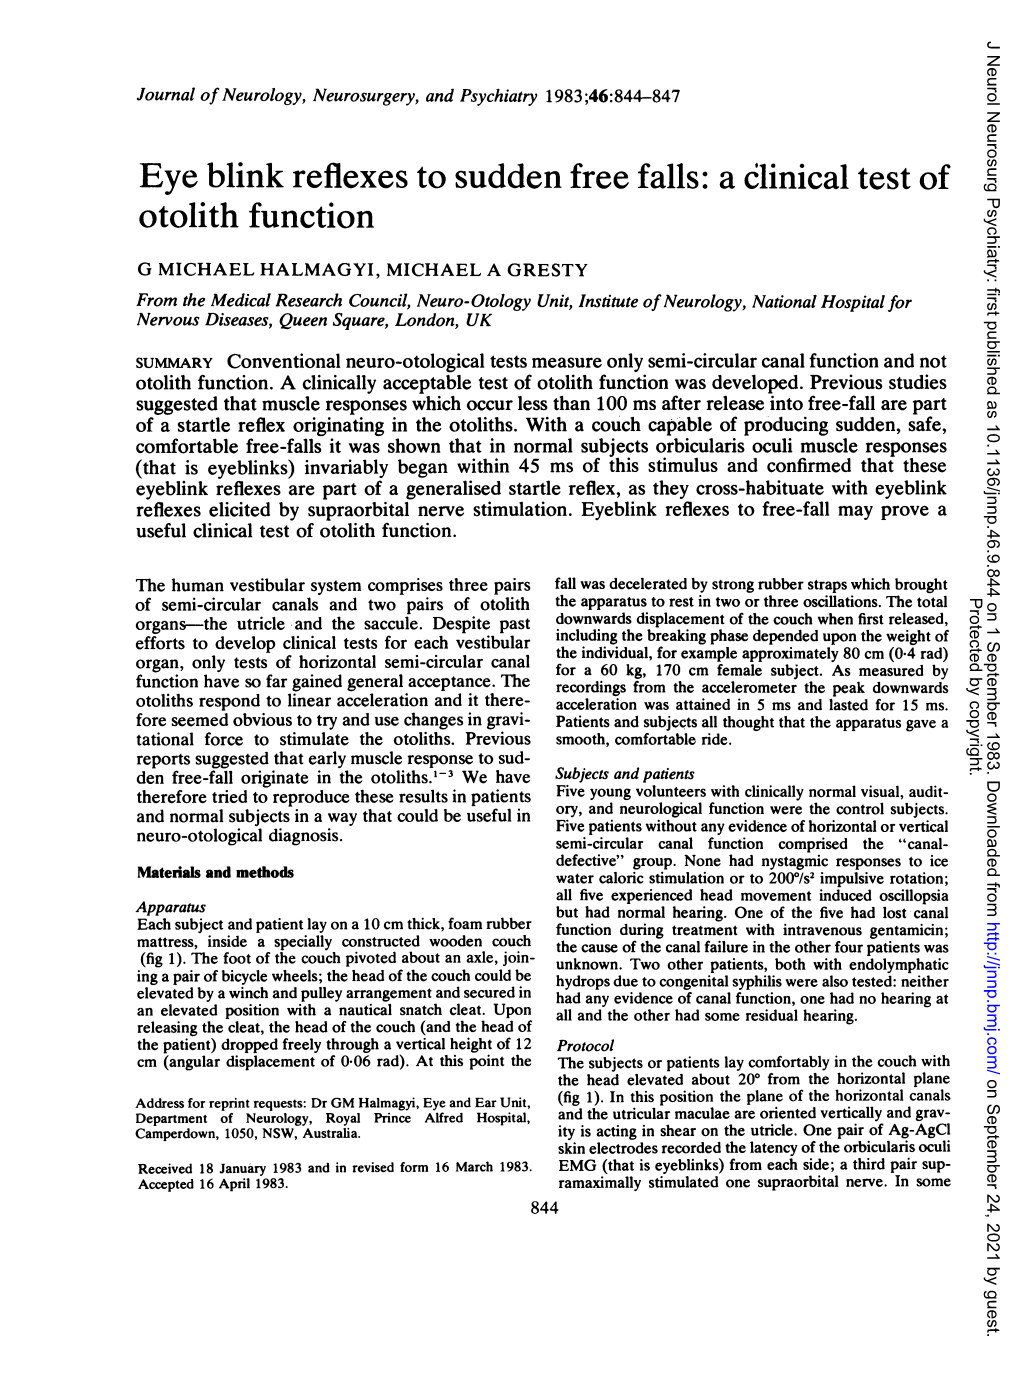 Eye Blink Reflexes to Sudden Free Falls: a Clinical Test of Otolith Function